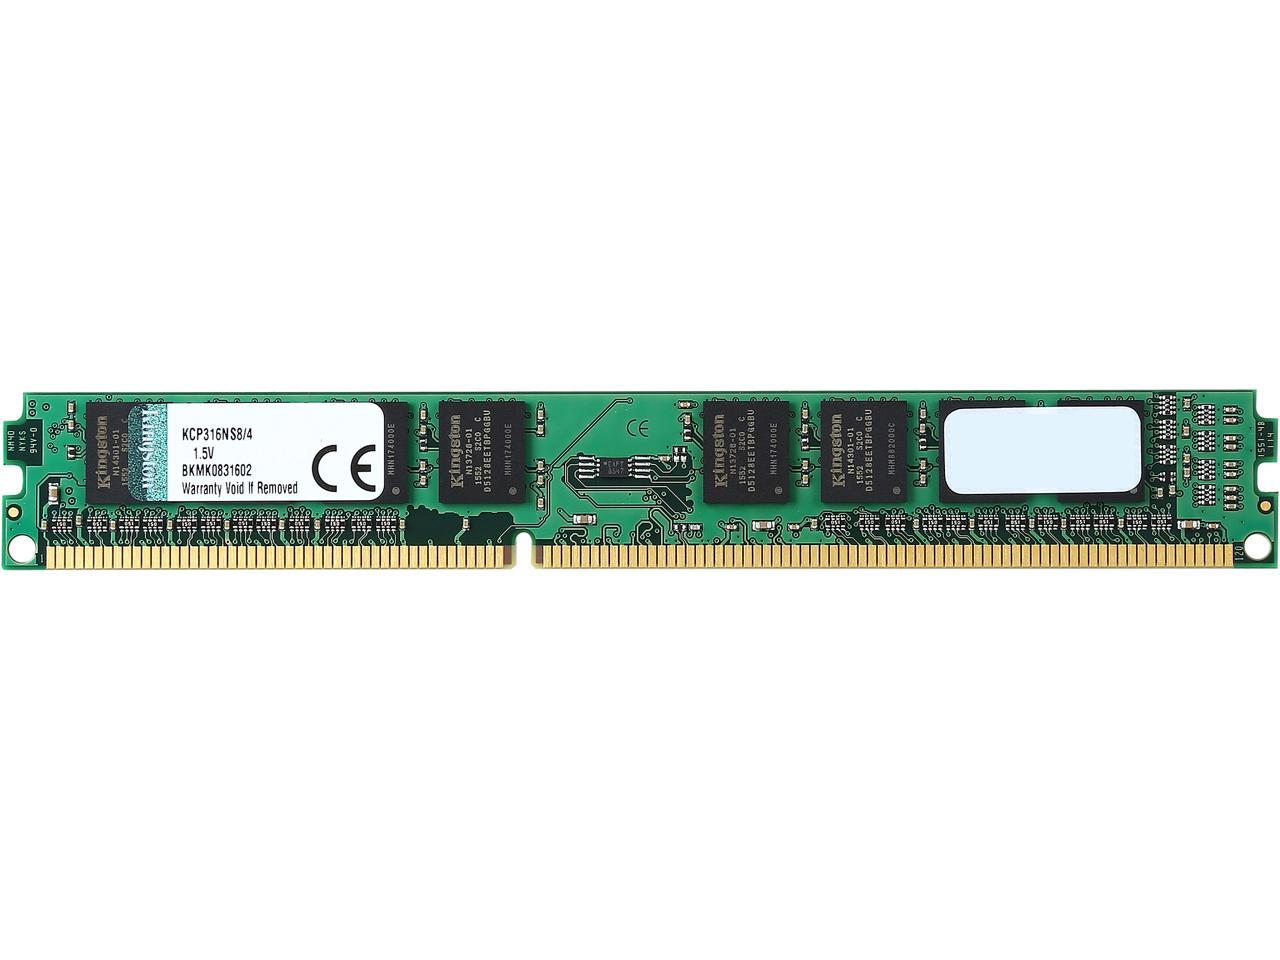 Kingston 4GB 240-Pin DDR3 SDRAM Unbuffered DDR3 1600 (PC3 12800) System Specific Memory Model KCP316NS8/4